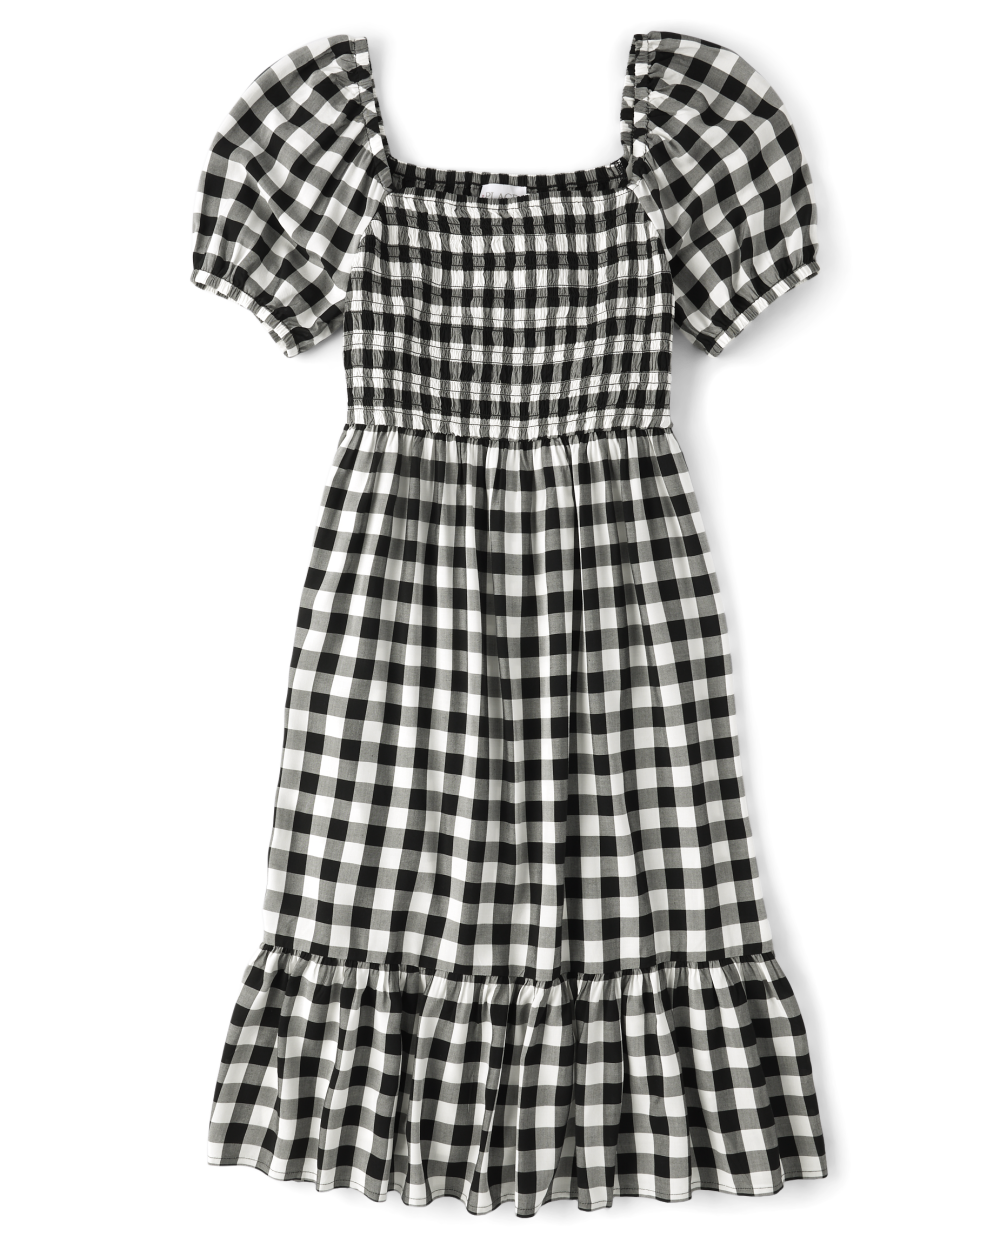 Smocked Square Neck Checkered Gingham Print Above the Knee Rayon Puff Sleeves Short Sleeves Sleeves Dress With Ruffles